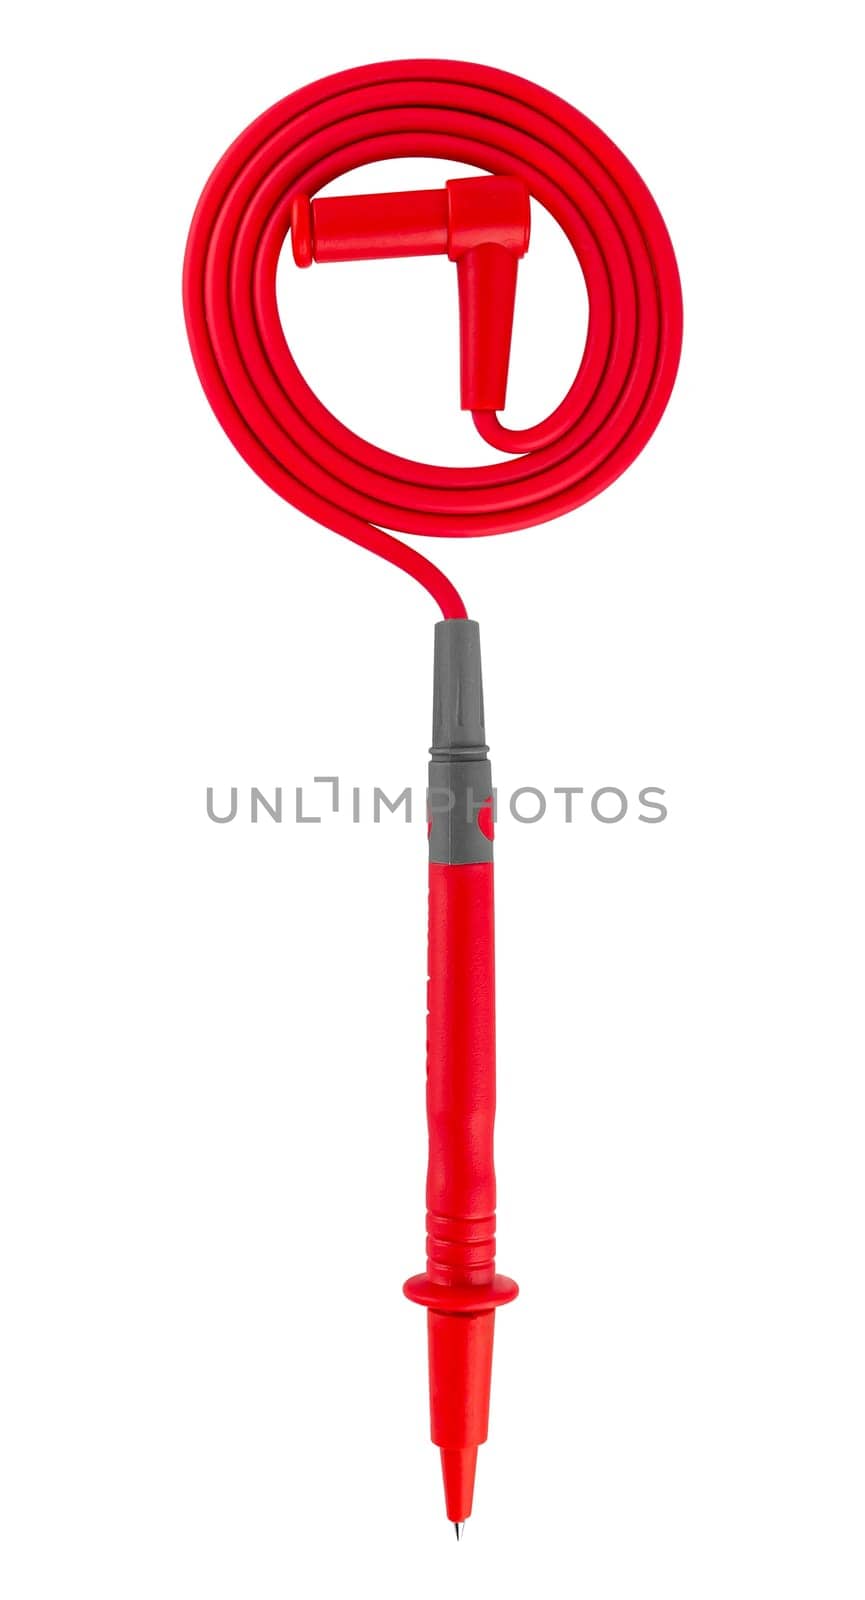 Multimeter probe, insulated, white background by A_A